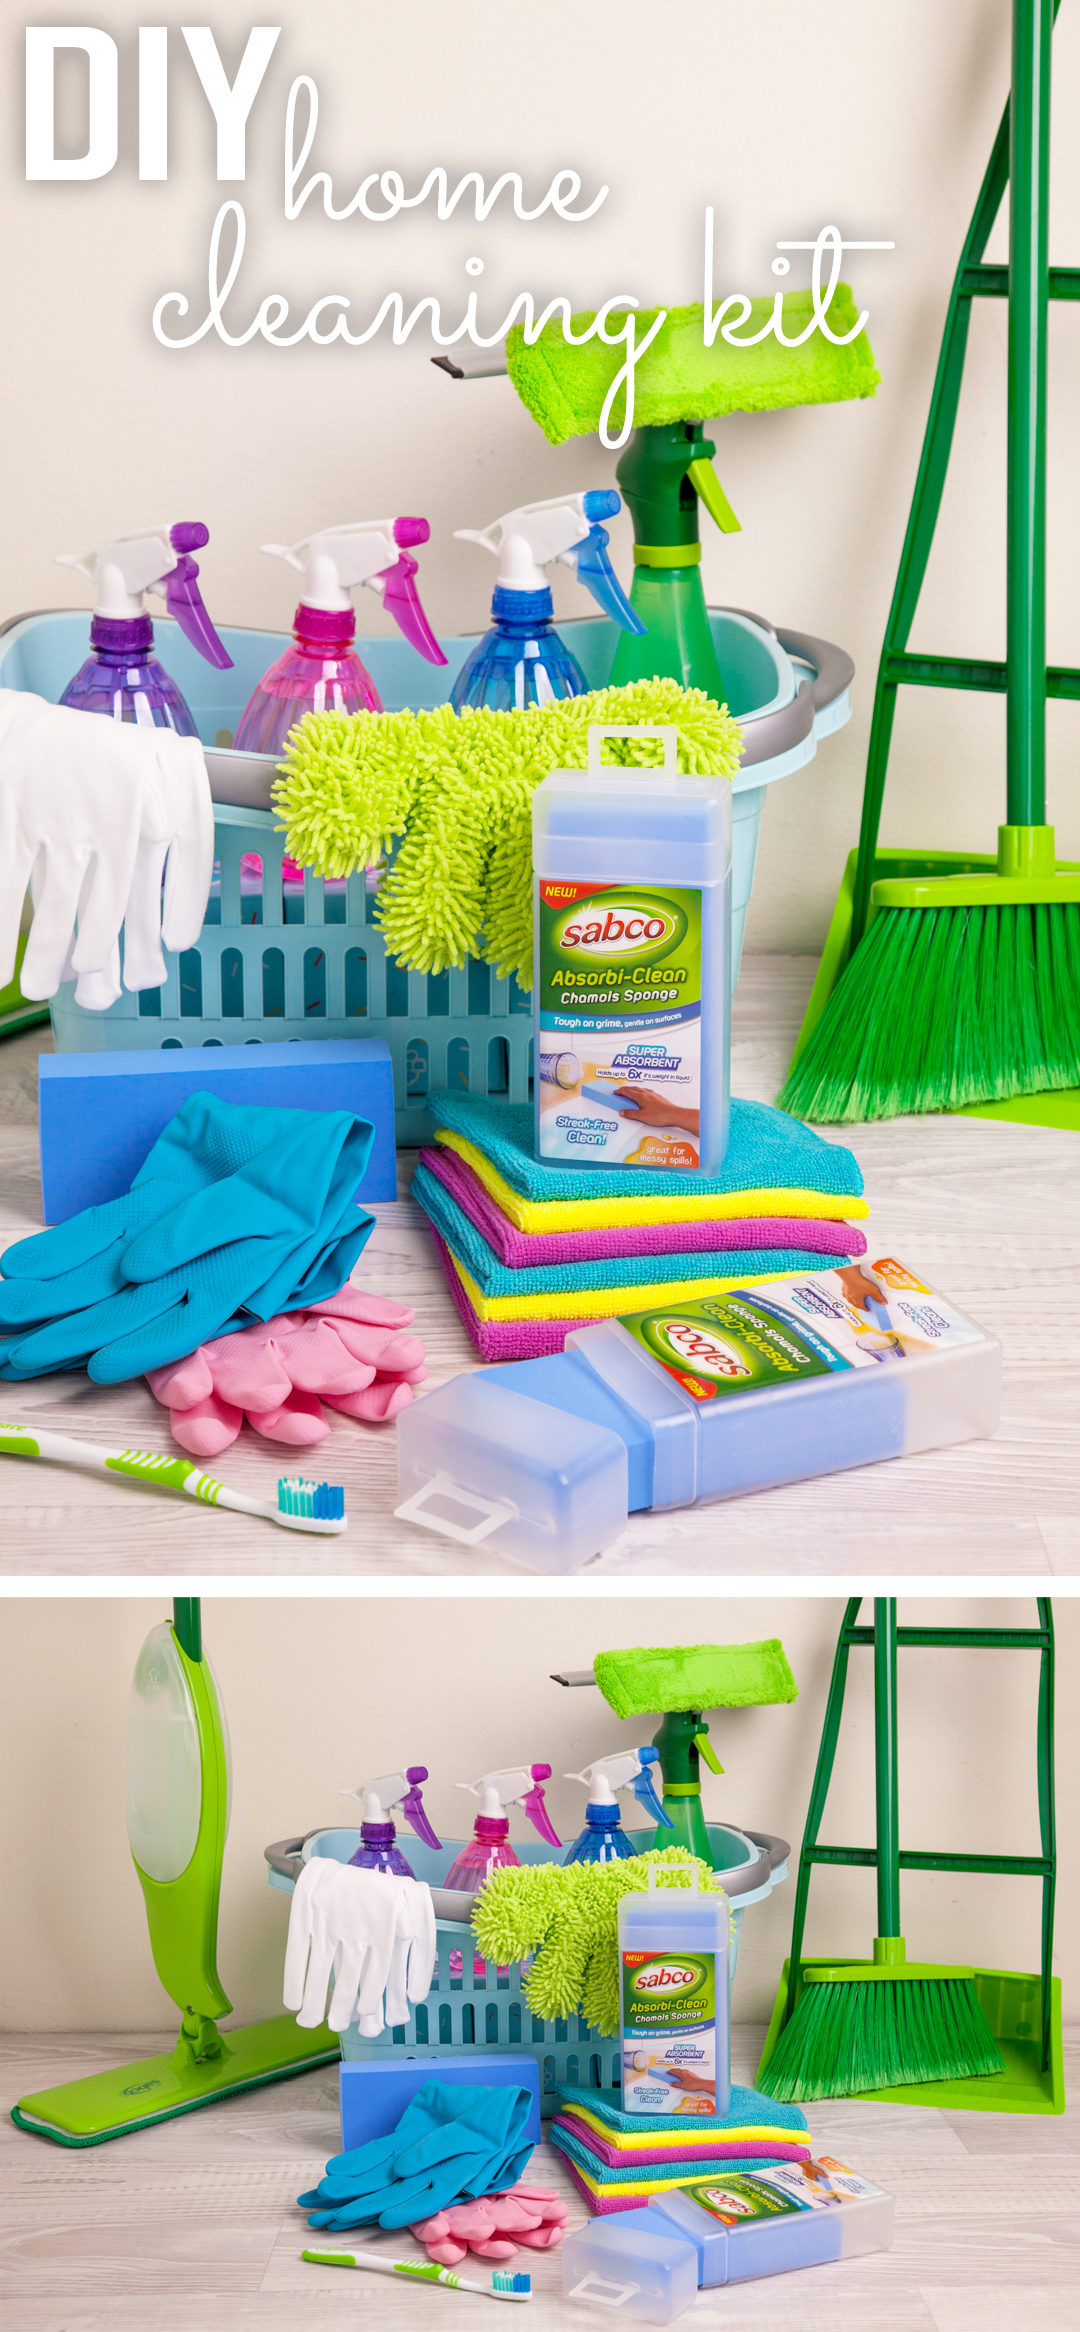 Put together this handy DIY home cleaning kit with all the essentials in the one place! Helps you to keep a cleaner, tidier, happier home.